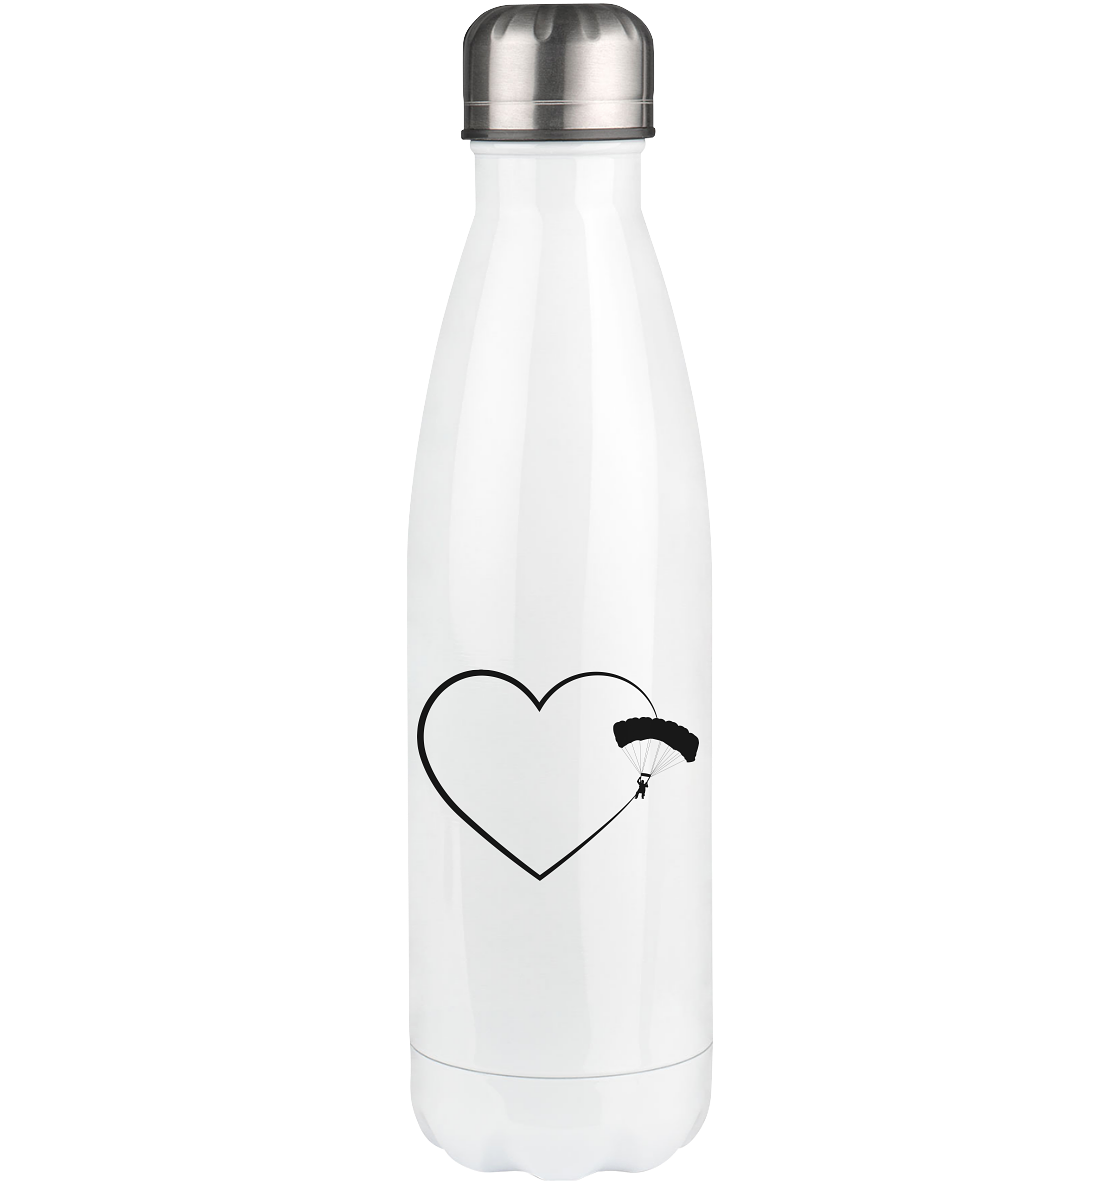 Heart 2 and Paragliding - Edelstahl Thermosflasche berge 500ml